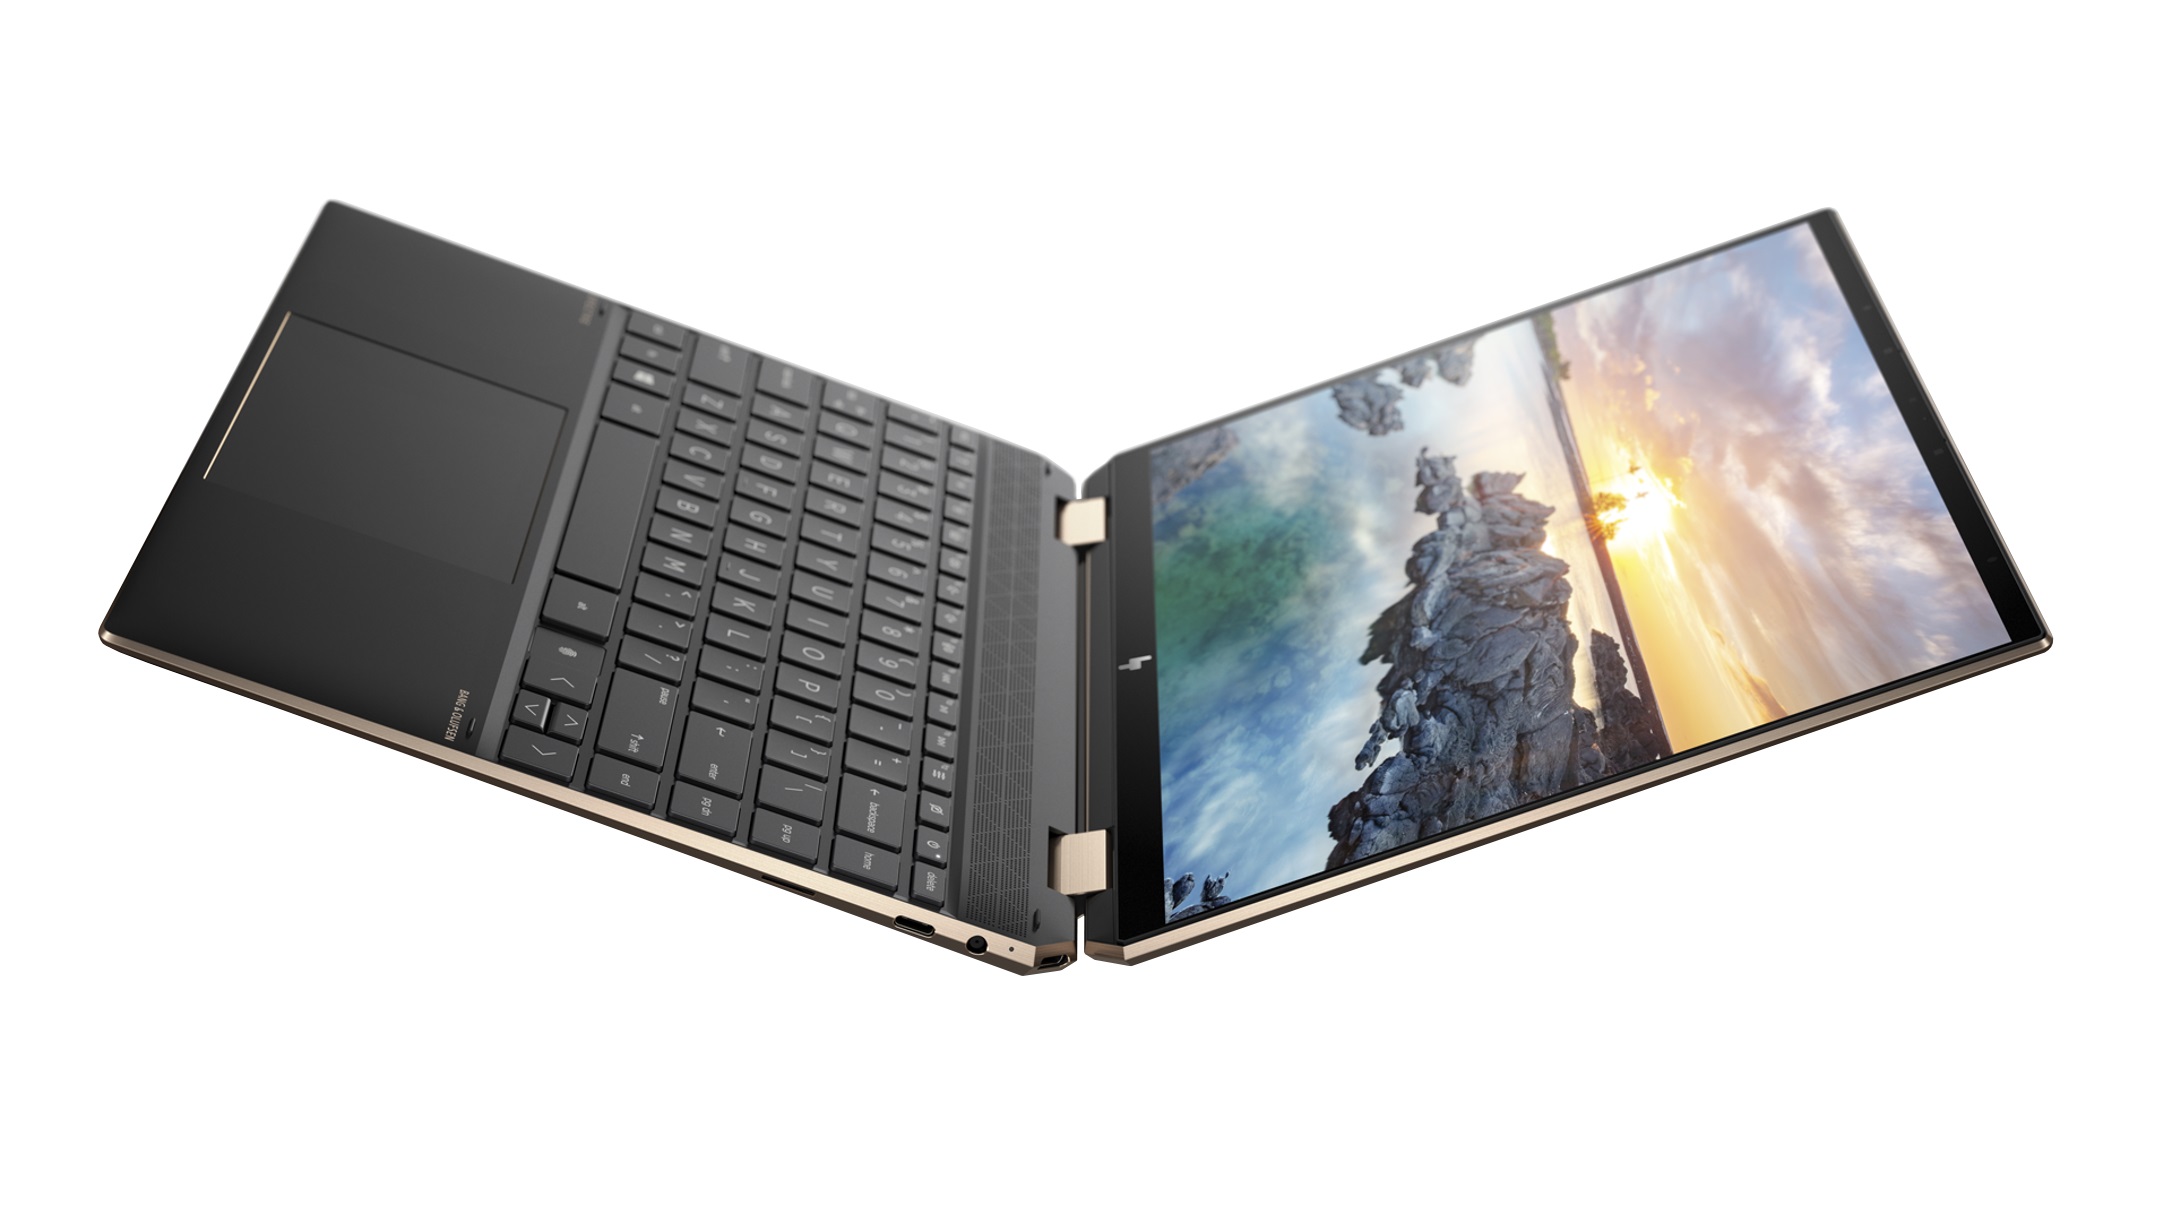 HP Spectre x360 14 opened at an angle with the keyboard to the left